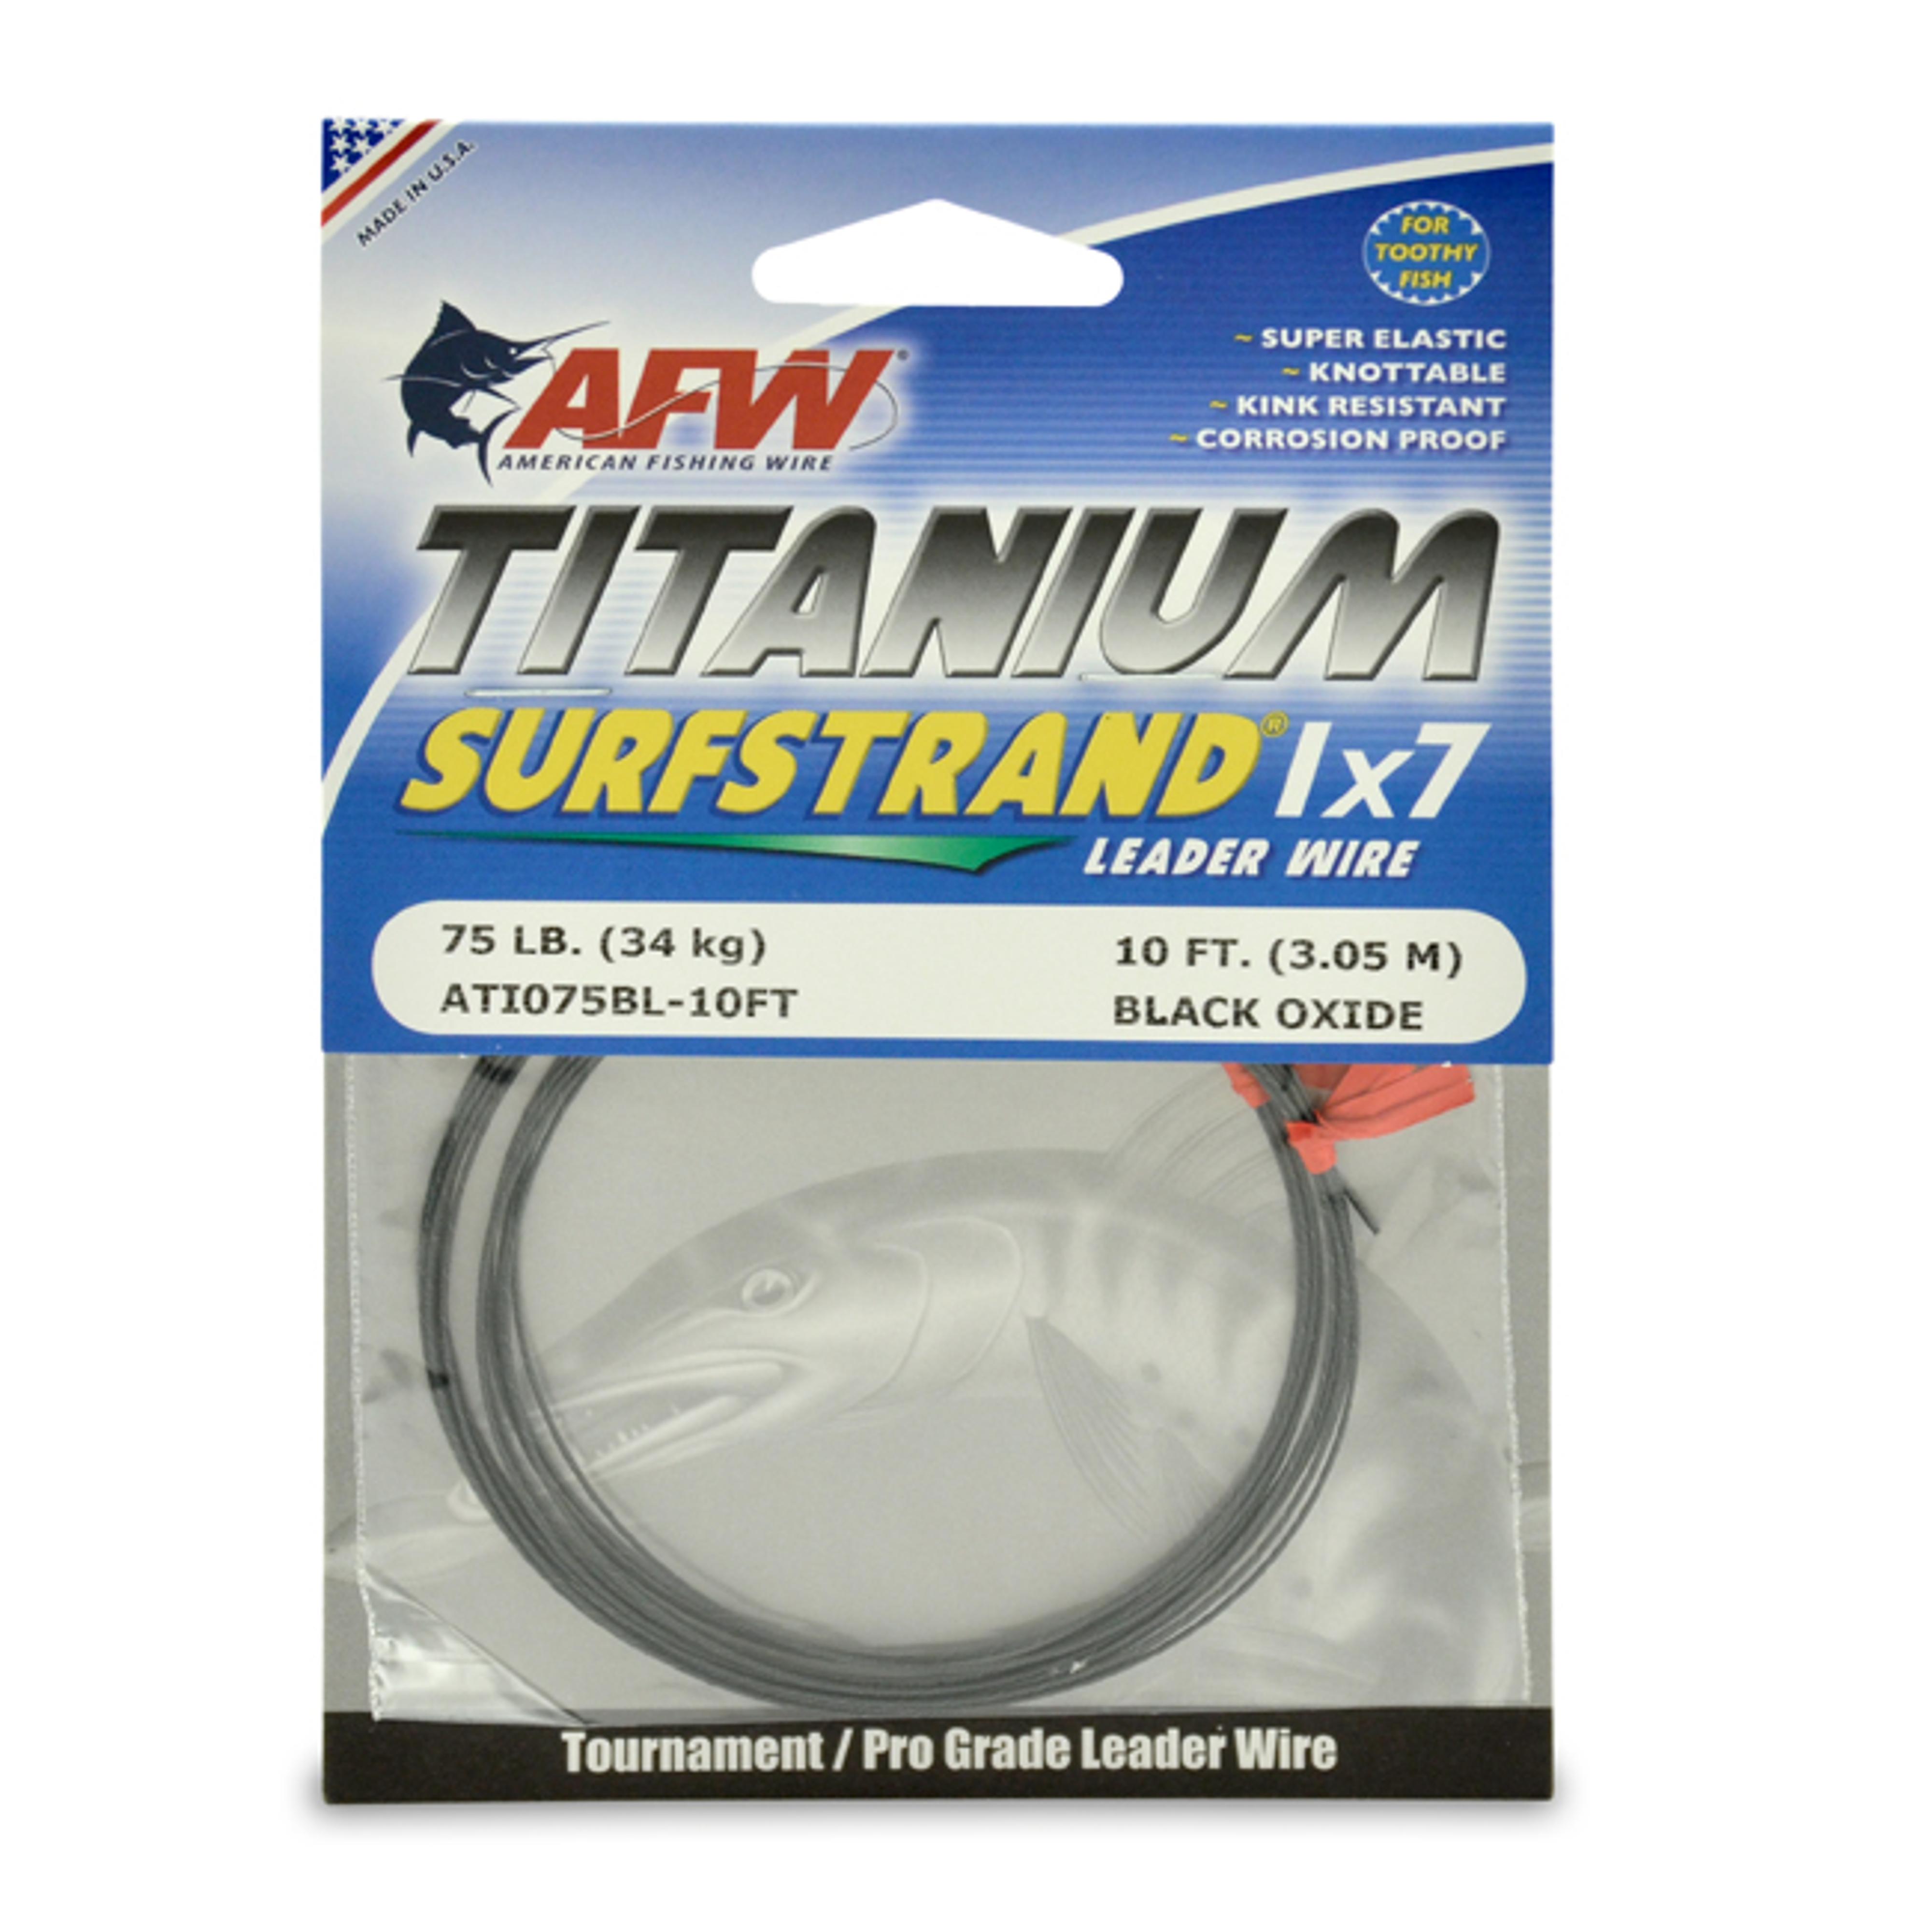 Titanium Surfstrand, Bare 1x7 Leader Wire, 75 lb (34 kg) test, .026 in  (0.66 mm) dia, Black Oxide, 10 ft (3.1 m): Fishermans Ideal Supply House